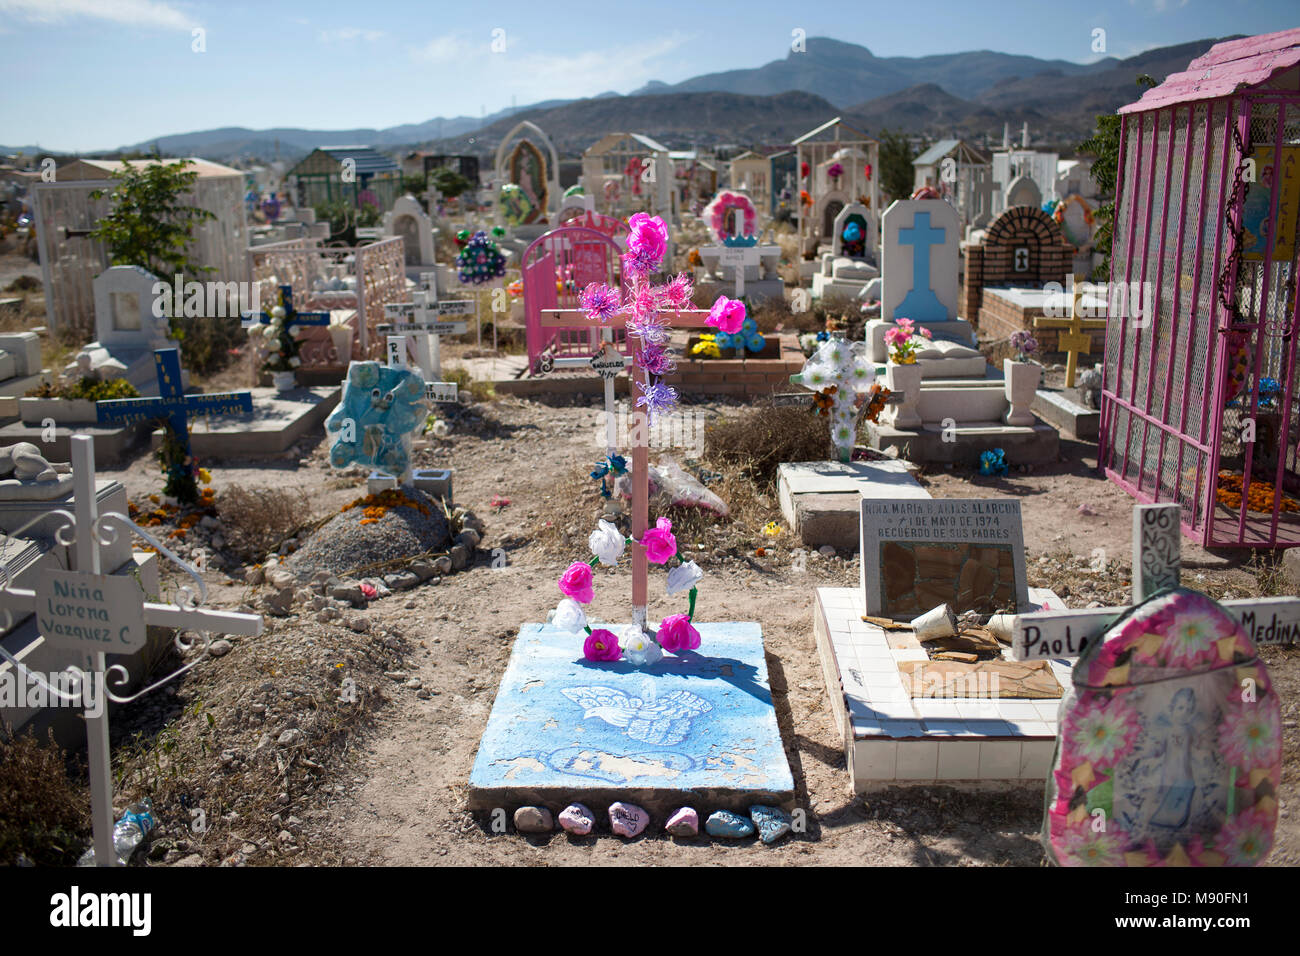 A view of the Tepeyac graveyard in Ciudad Ju‡rez, Mexico on Thursday, November 13, 2014. The Tepeyac graveyard is the biggest in Ju‡rez. Stock Photo